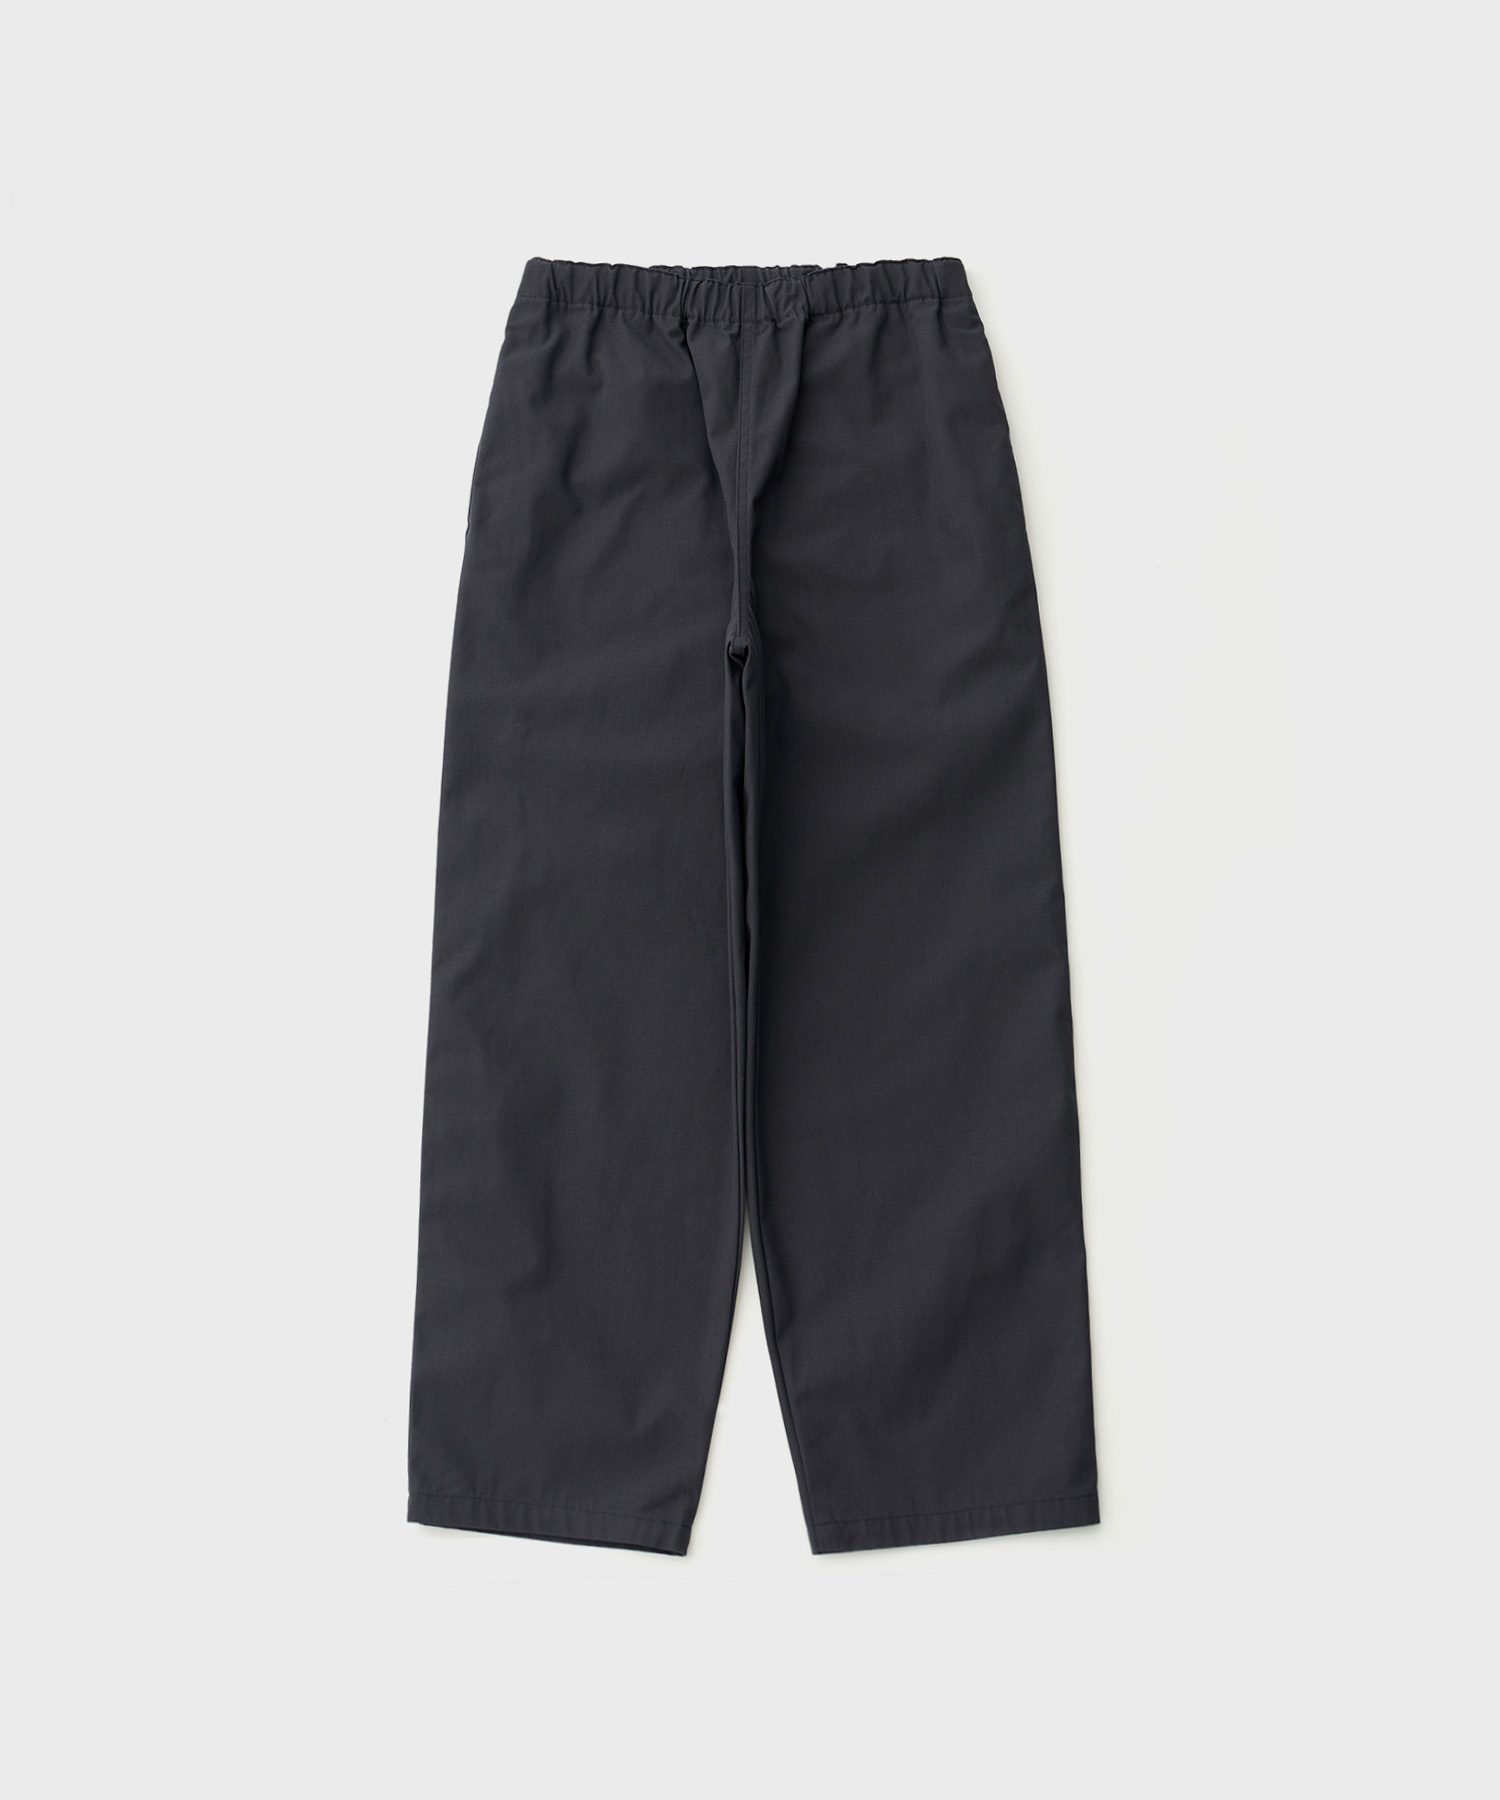 (w) Org Cotton / Recycle Polyester Twill Trousers (Navy)